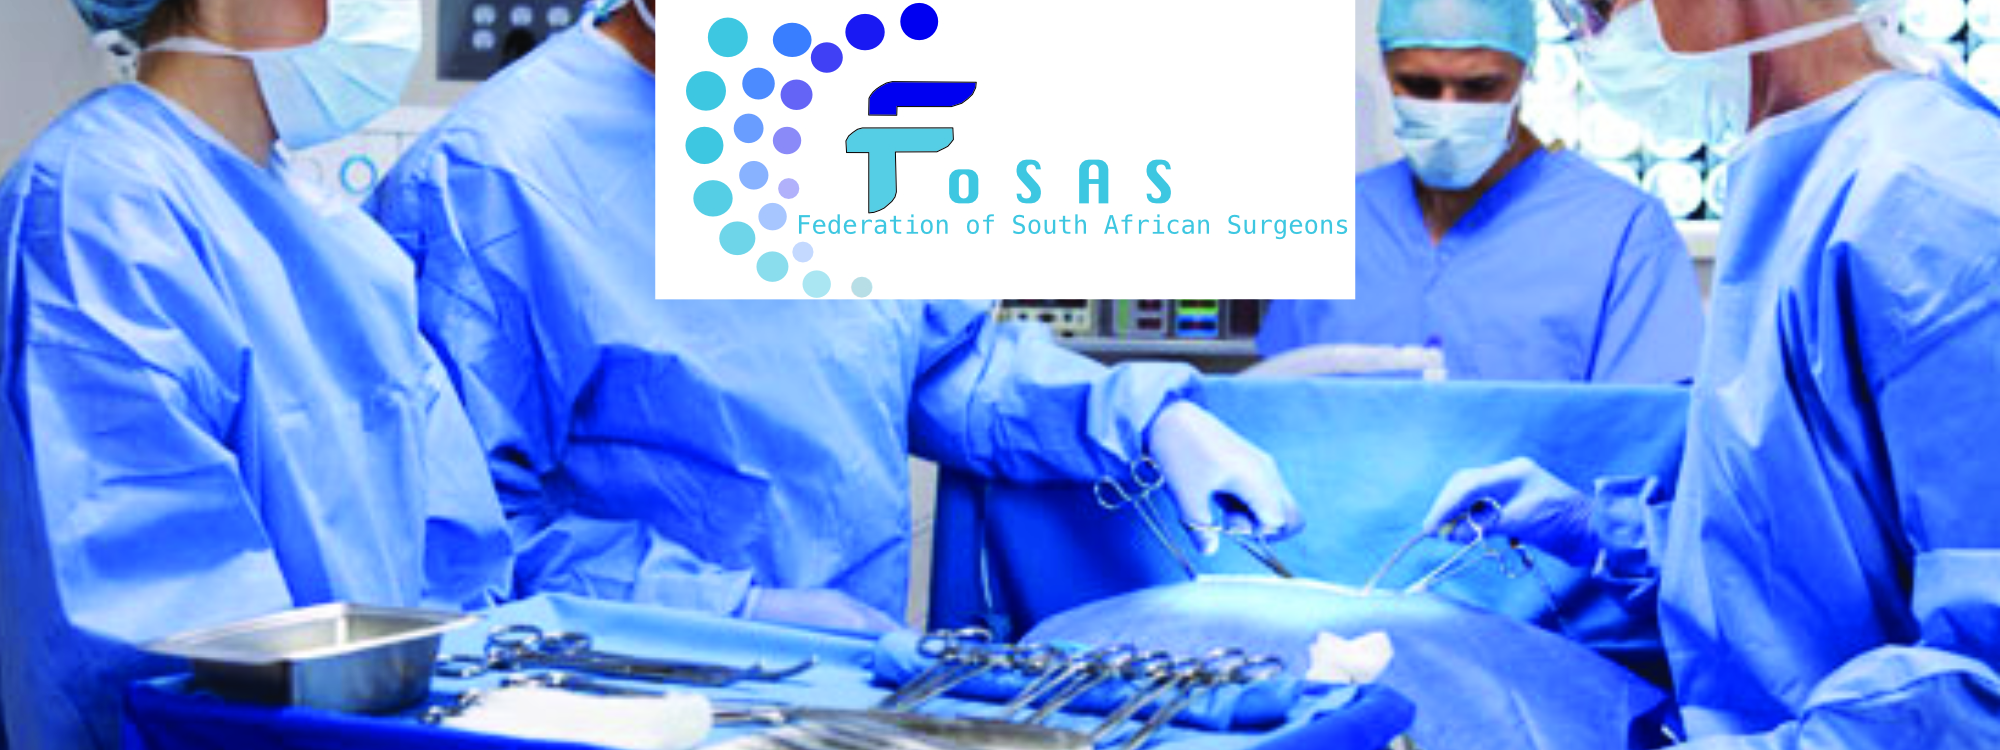 FoSAS - Federation of South African Surgeons